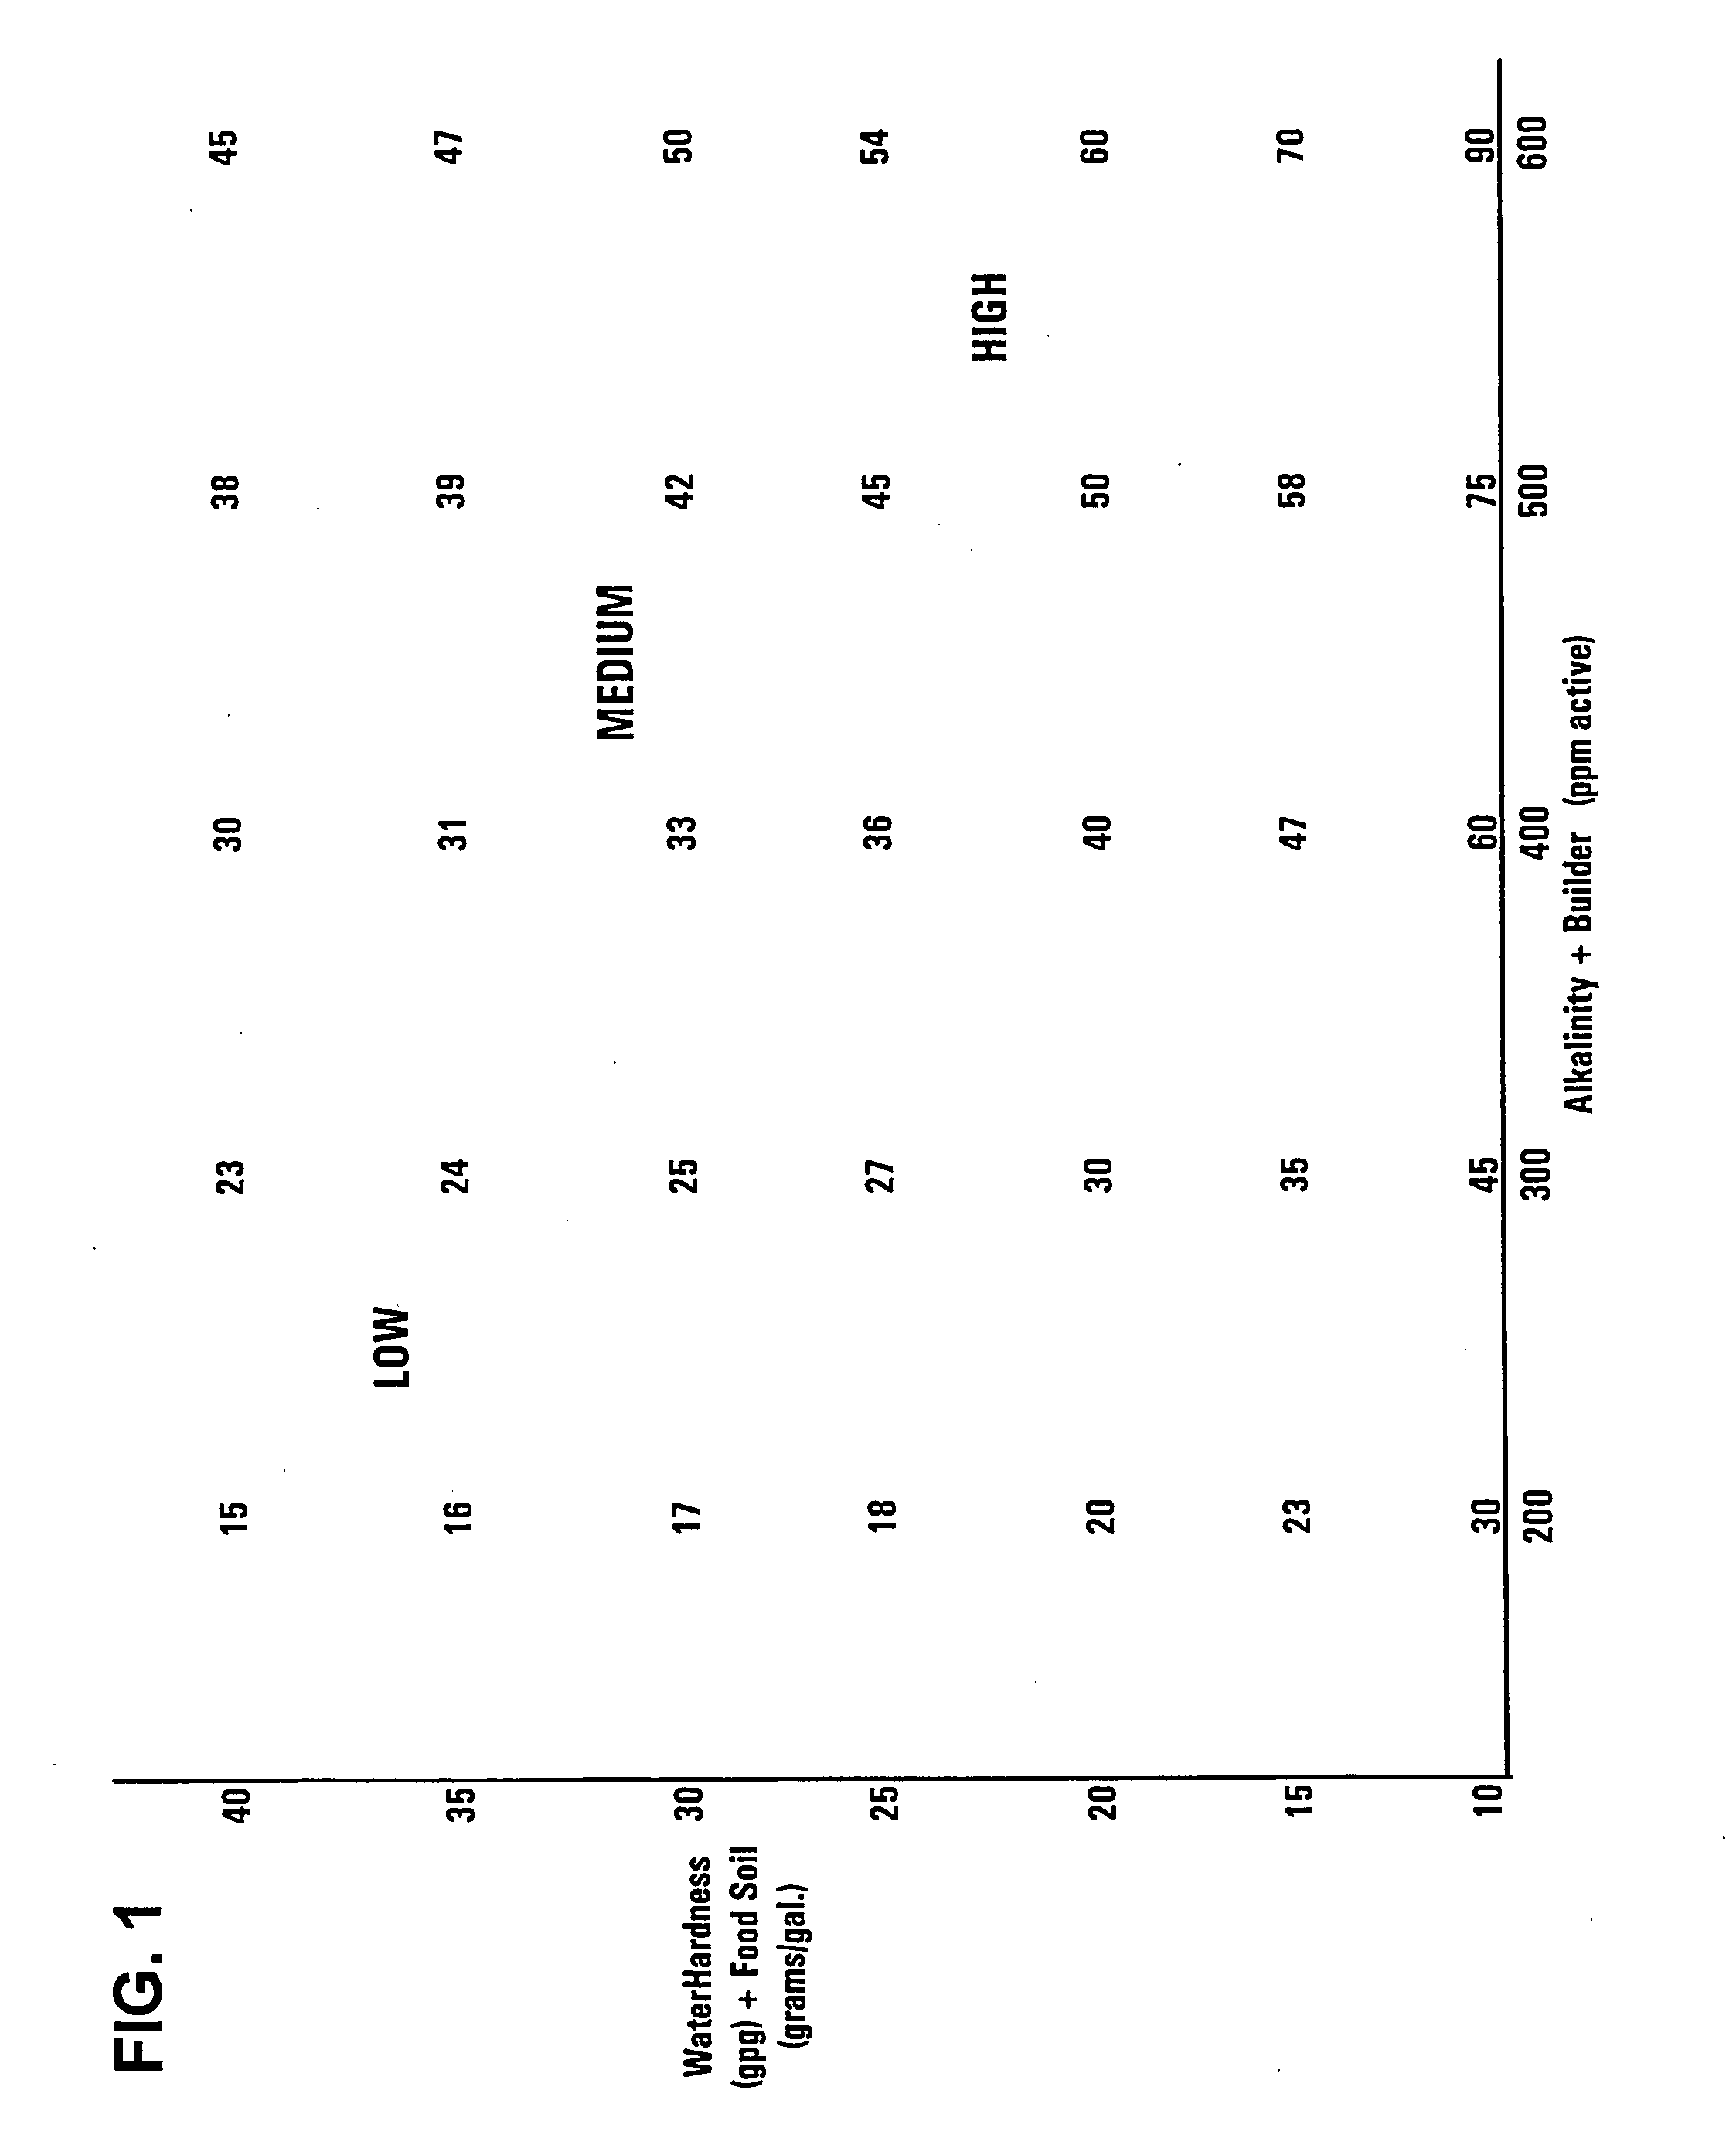 Warewashing composition for use in automatic dishwashing machines, and methods for manufacturing and using